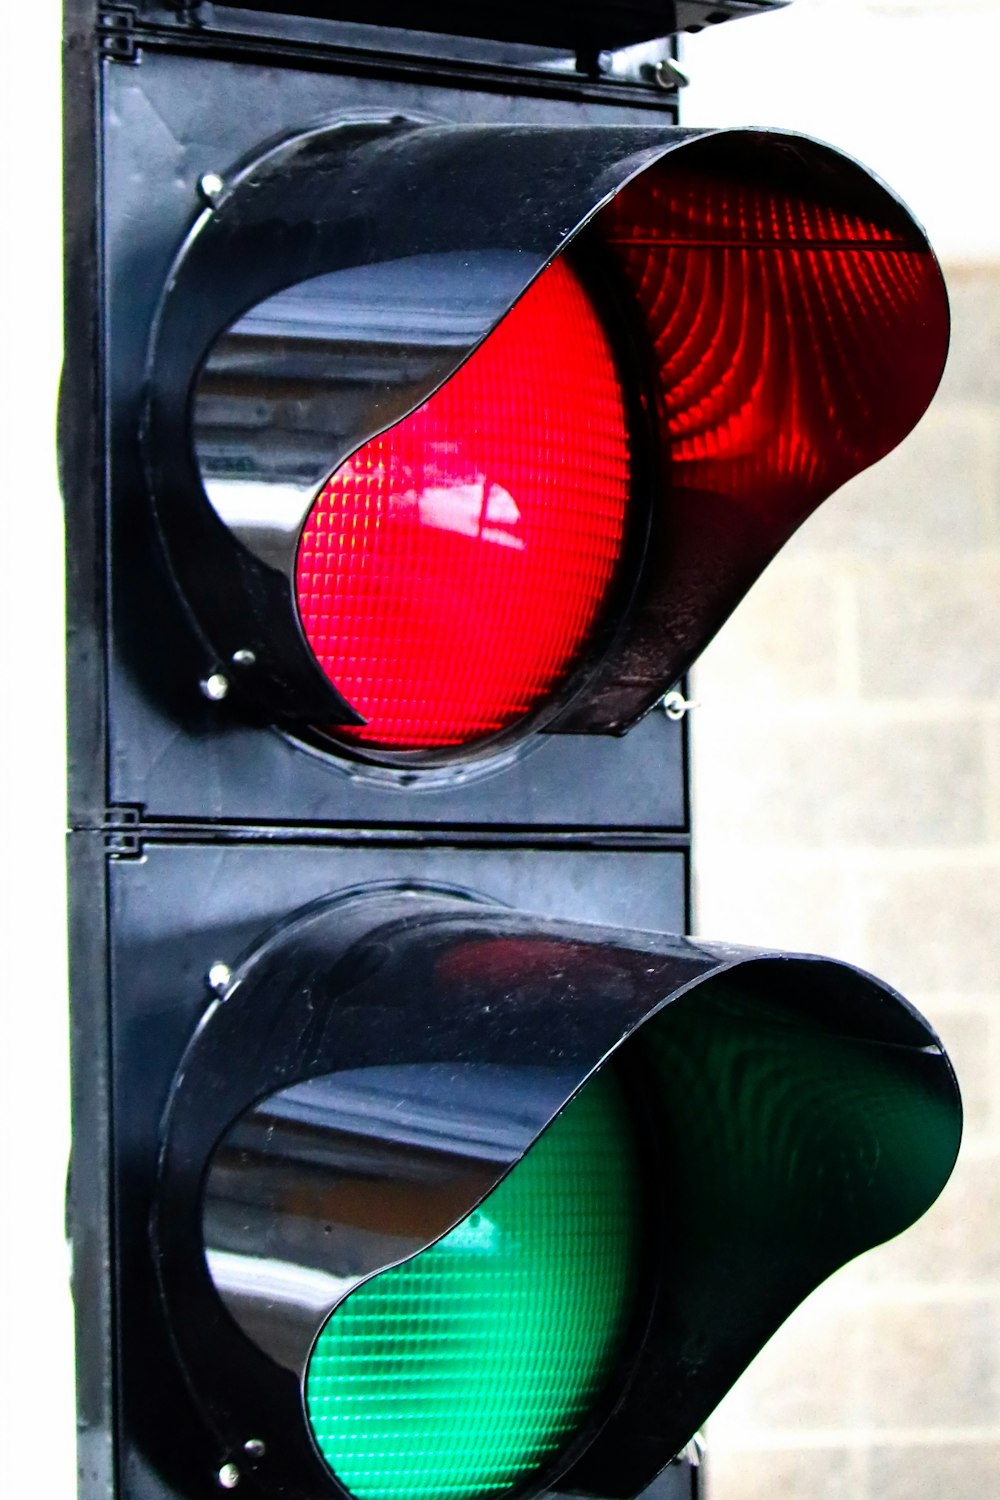 a close up of a traffic light with a red and green light